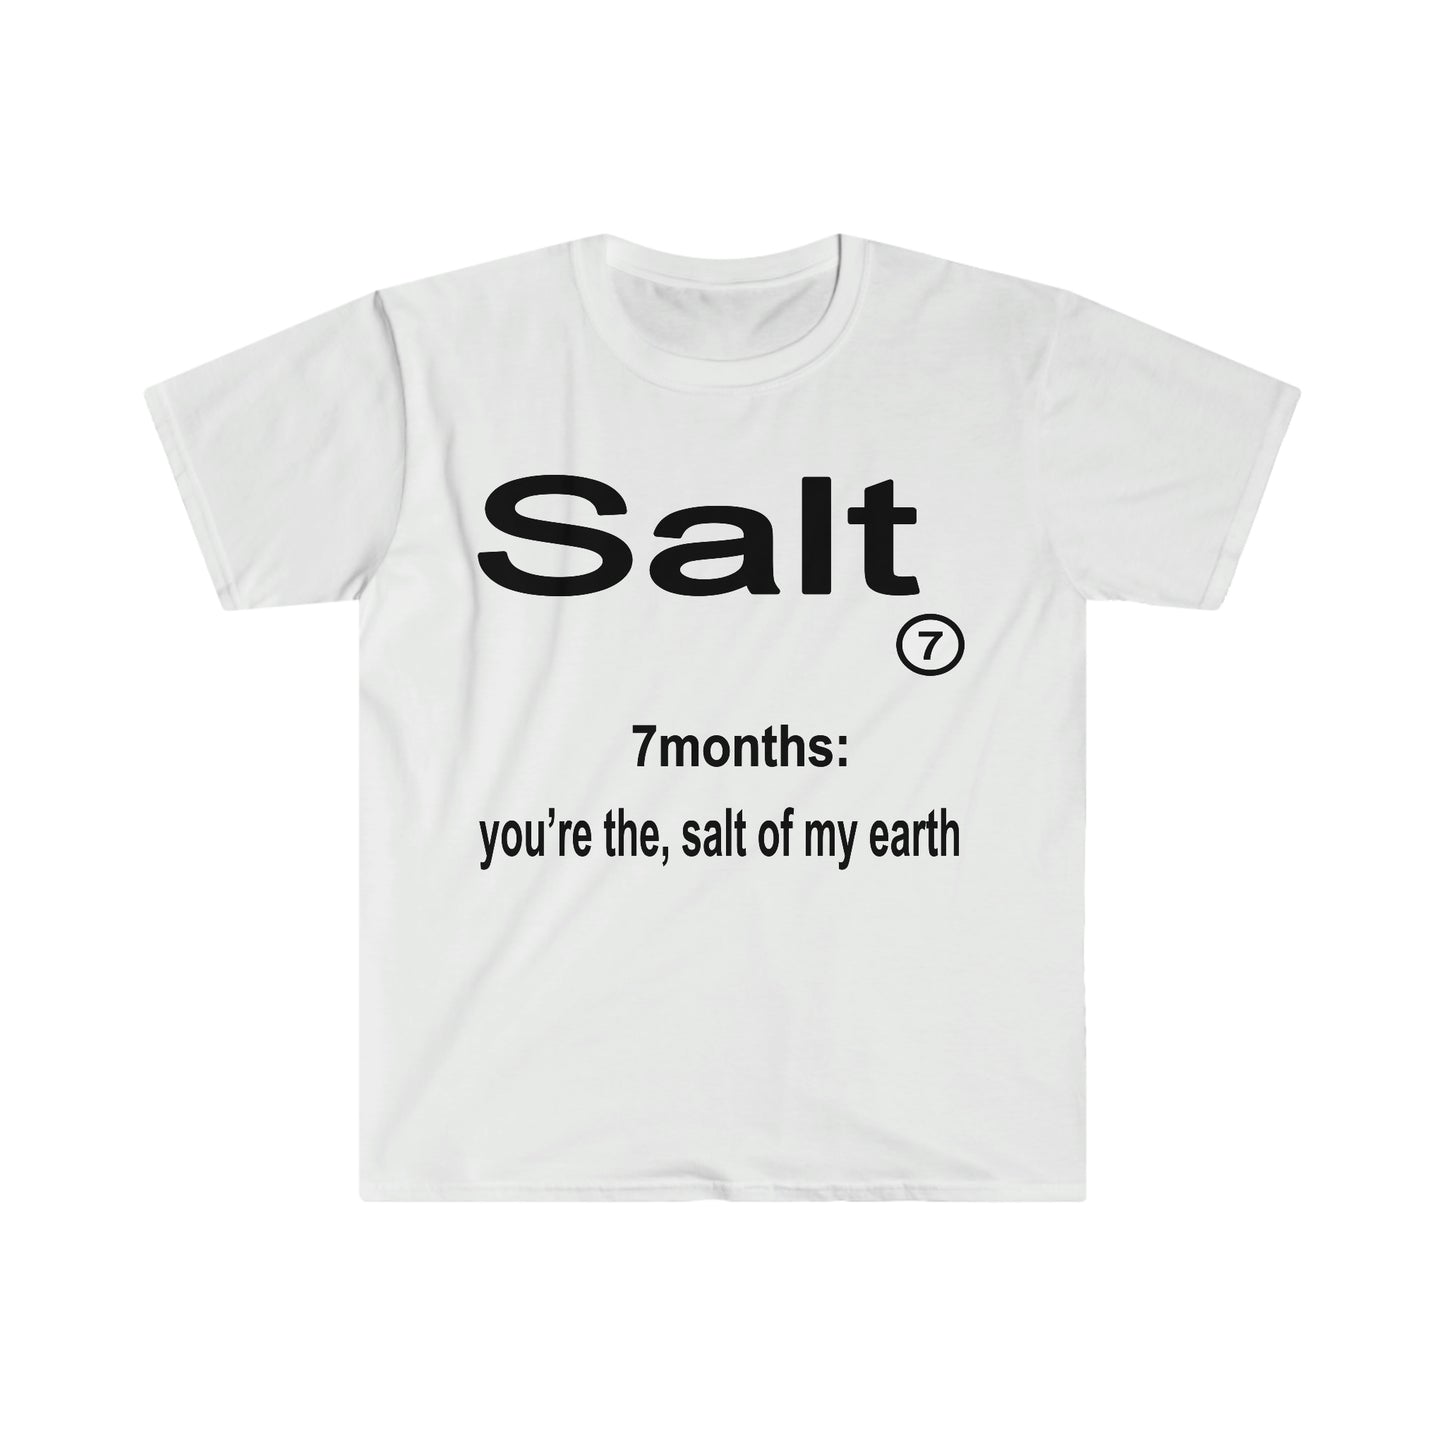 You're The Salt Of My Earth.